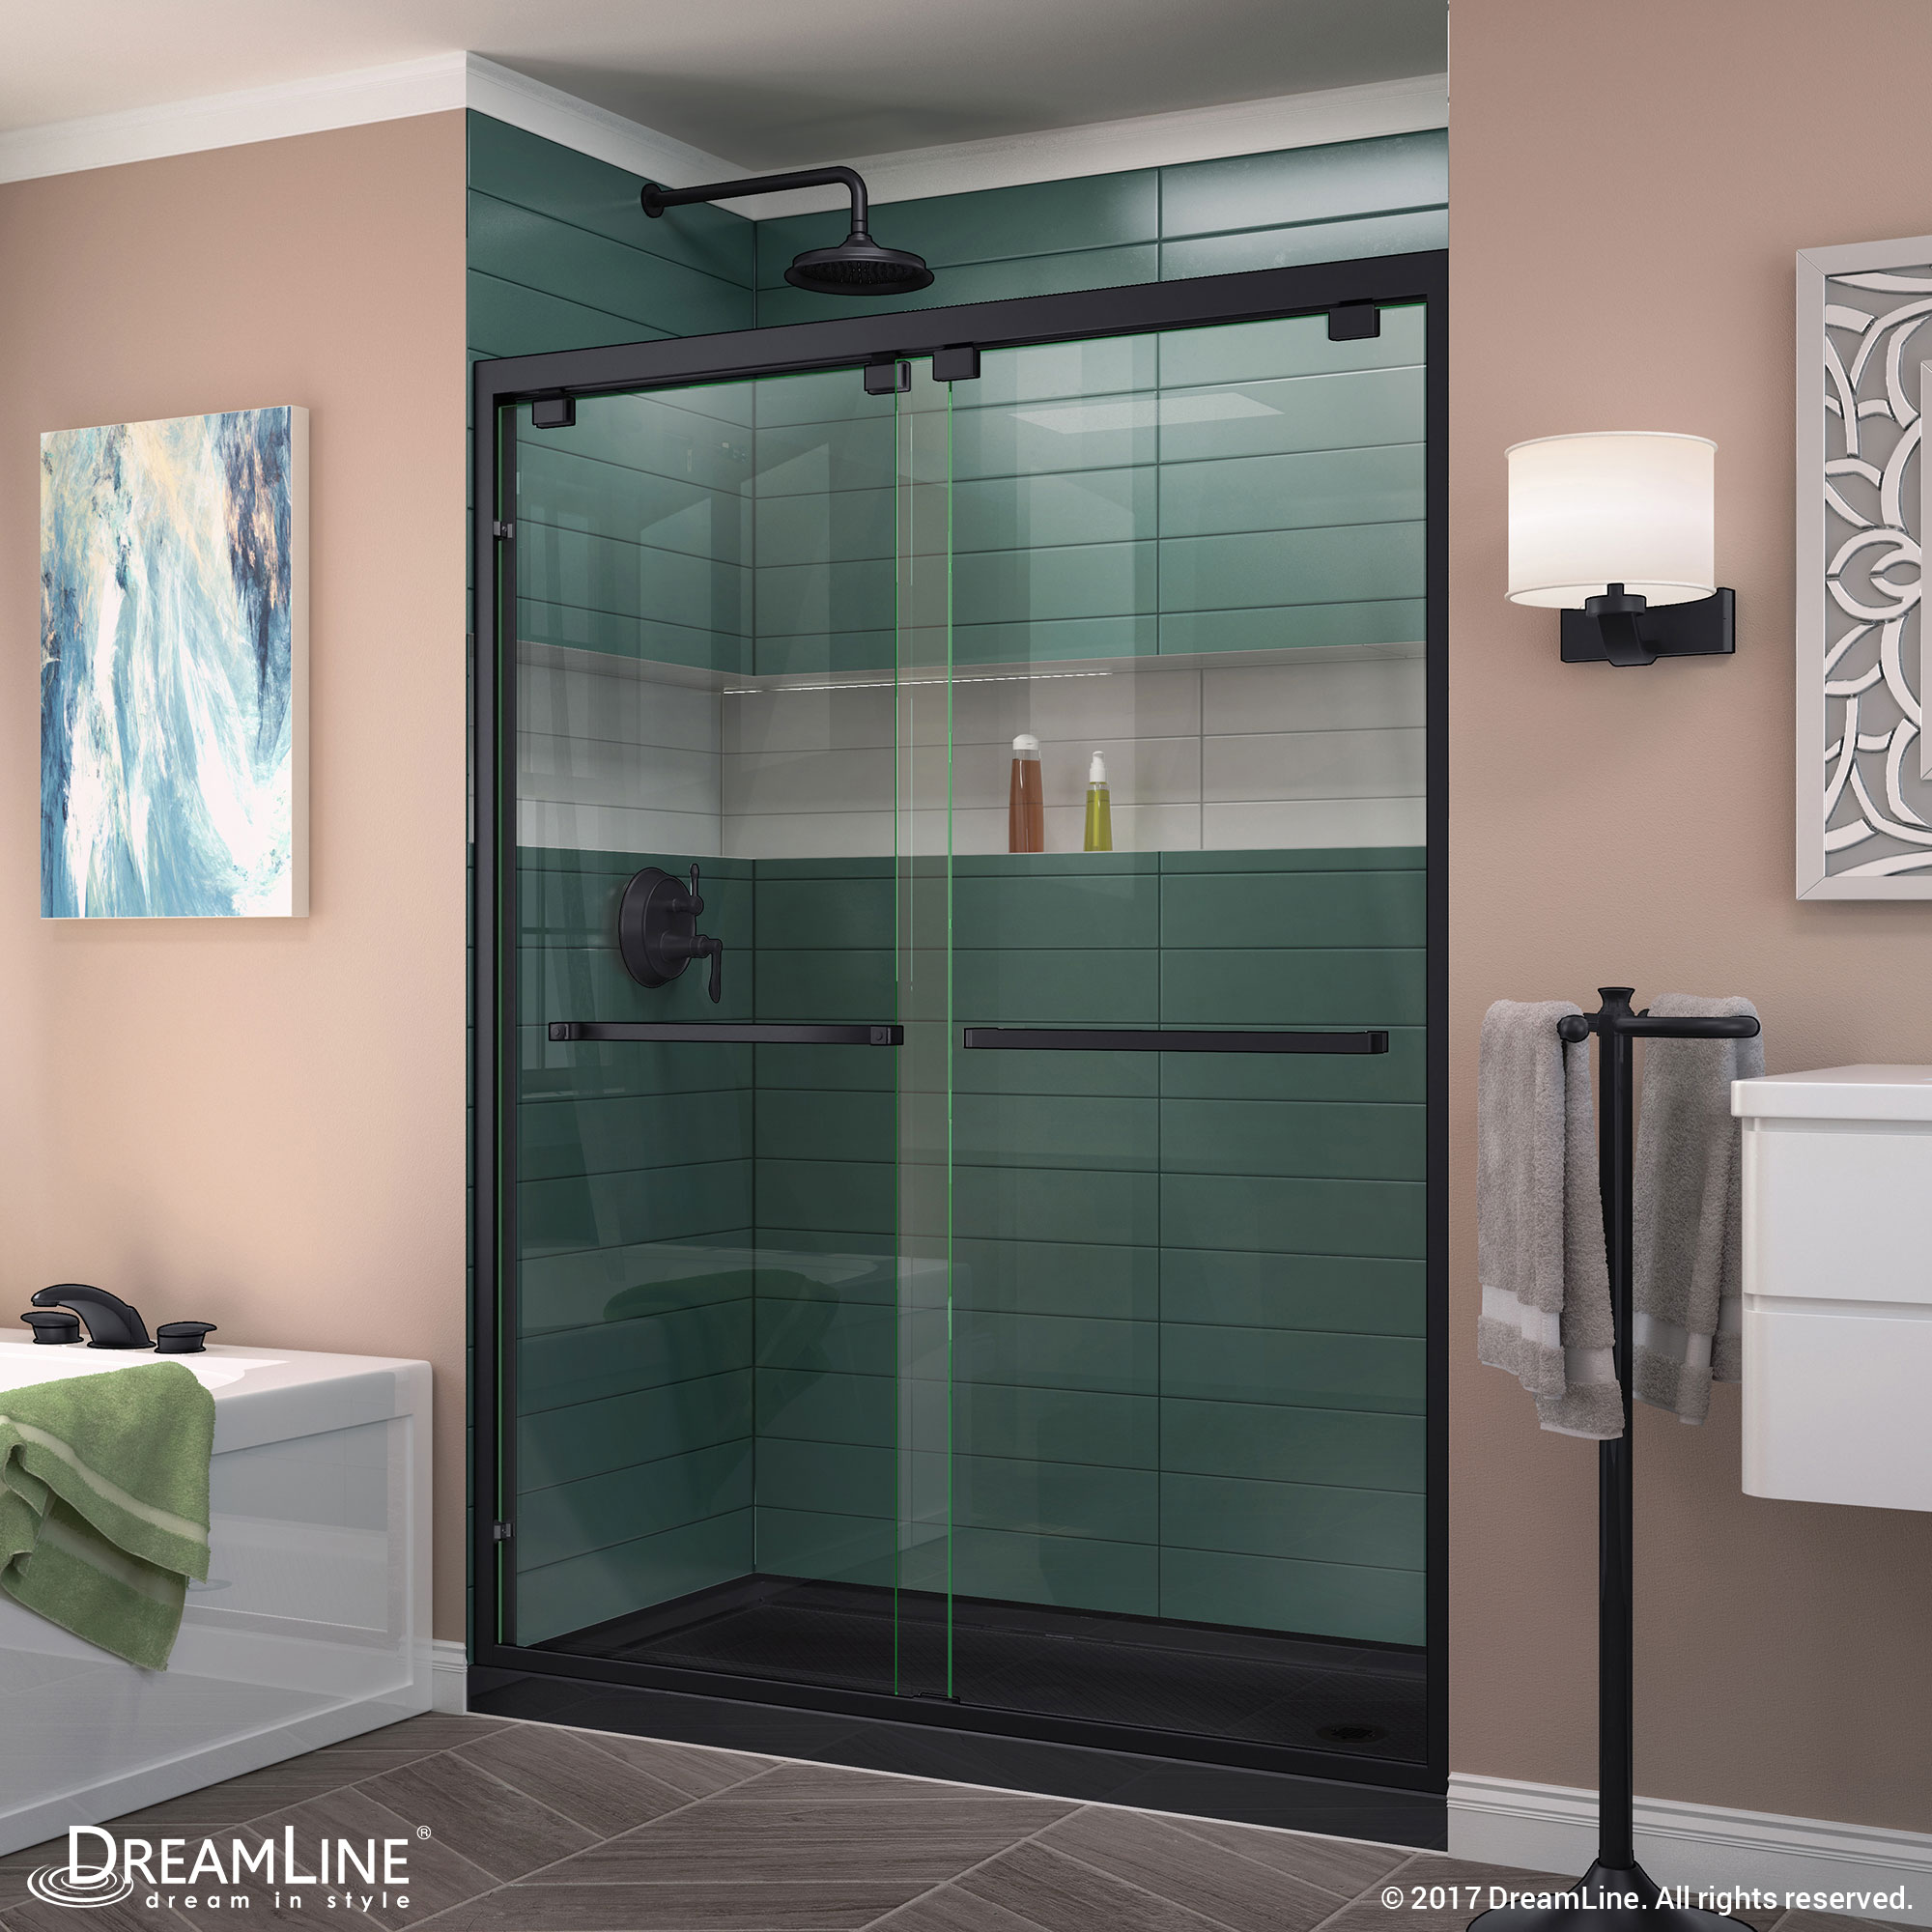 DreamLine Encore 32 in. D x 60 in. W x 78 3/4 in. H Bypass Shower Door in Brushed Nickel and Center Drain White Base Kit